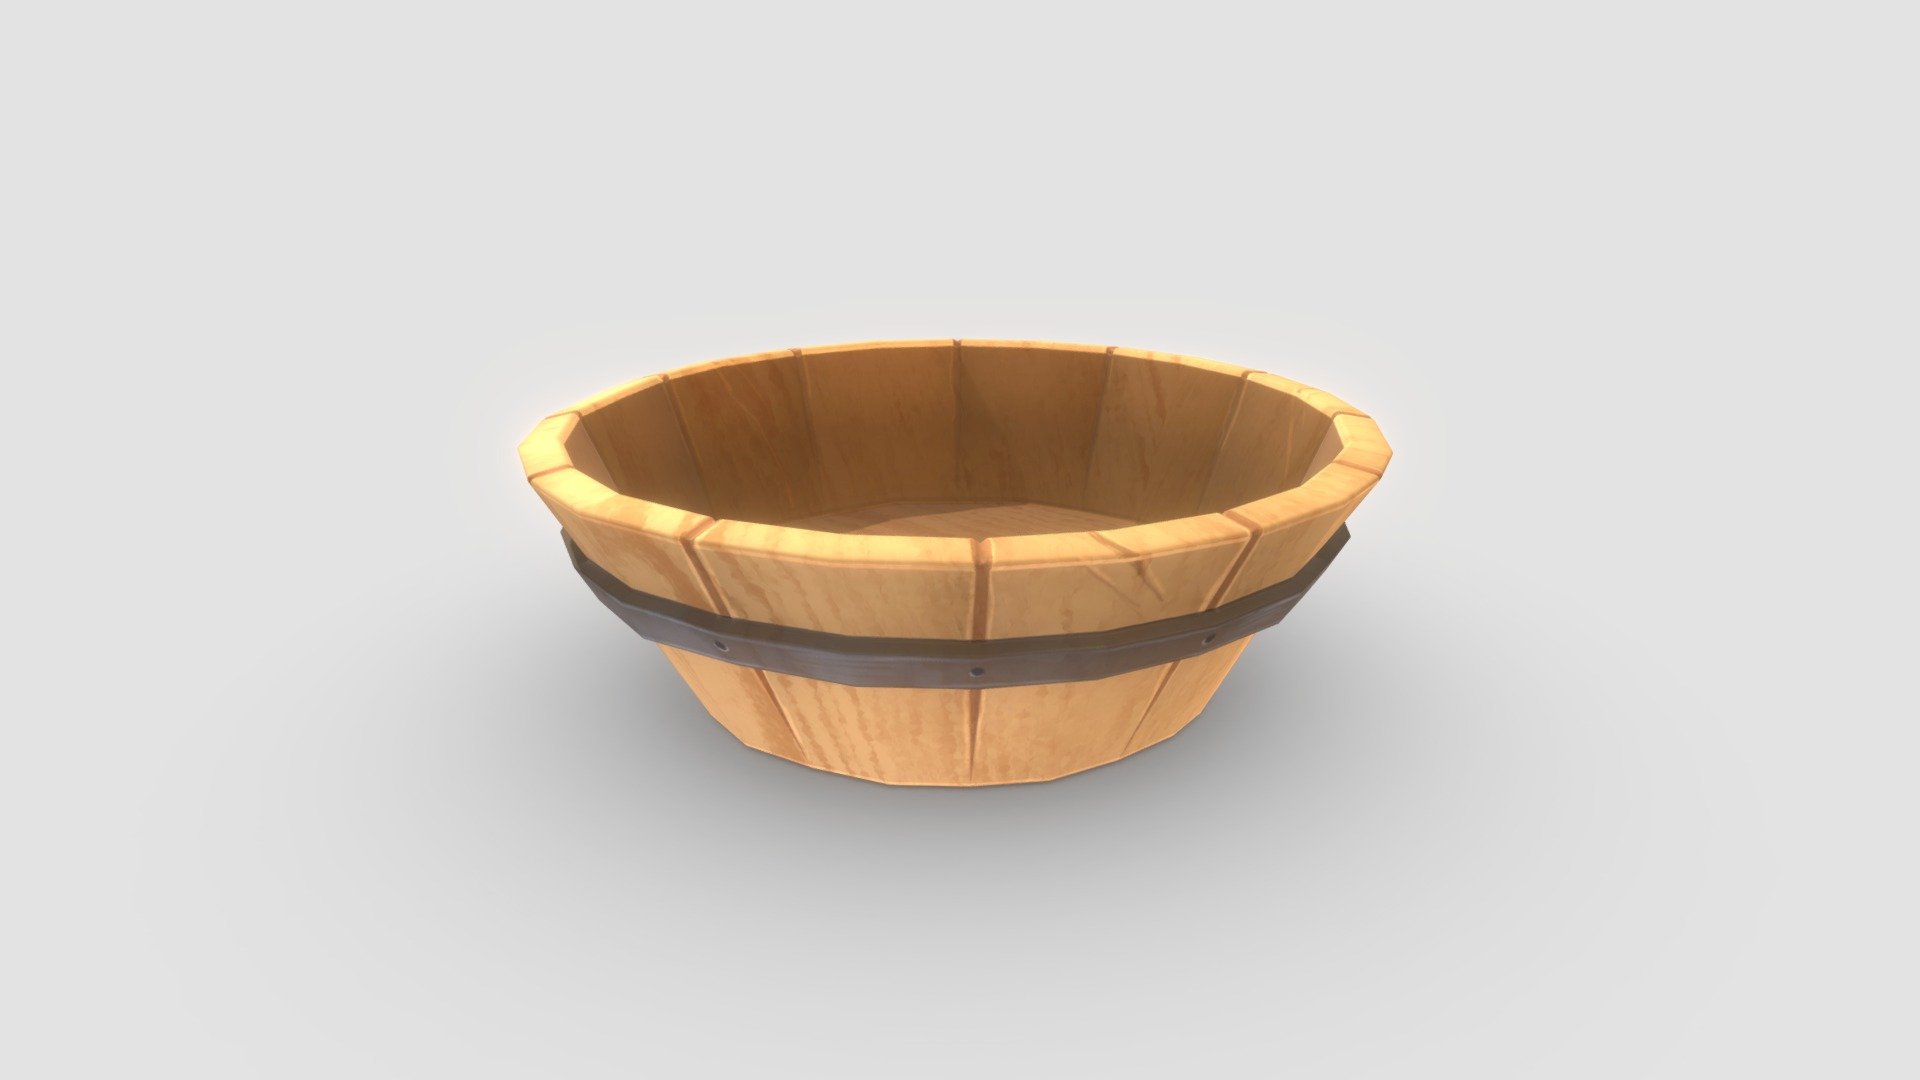 A simple Stylized 3D Model in Anime style representing a wooden Basket.
Made with Blender and SubstancePainter.
A Game Ready Asset containing 7 LOD's, last one beeing an Imposter 3d model